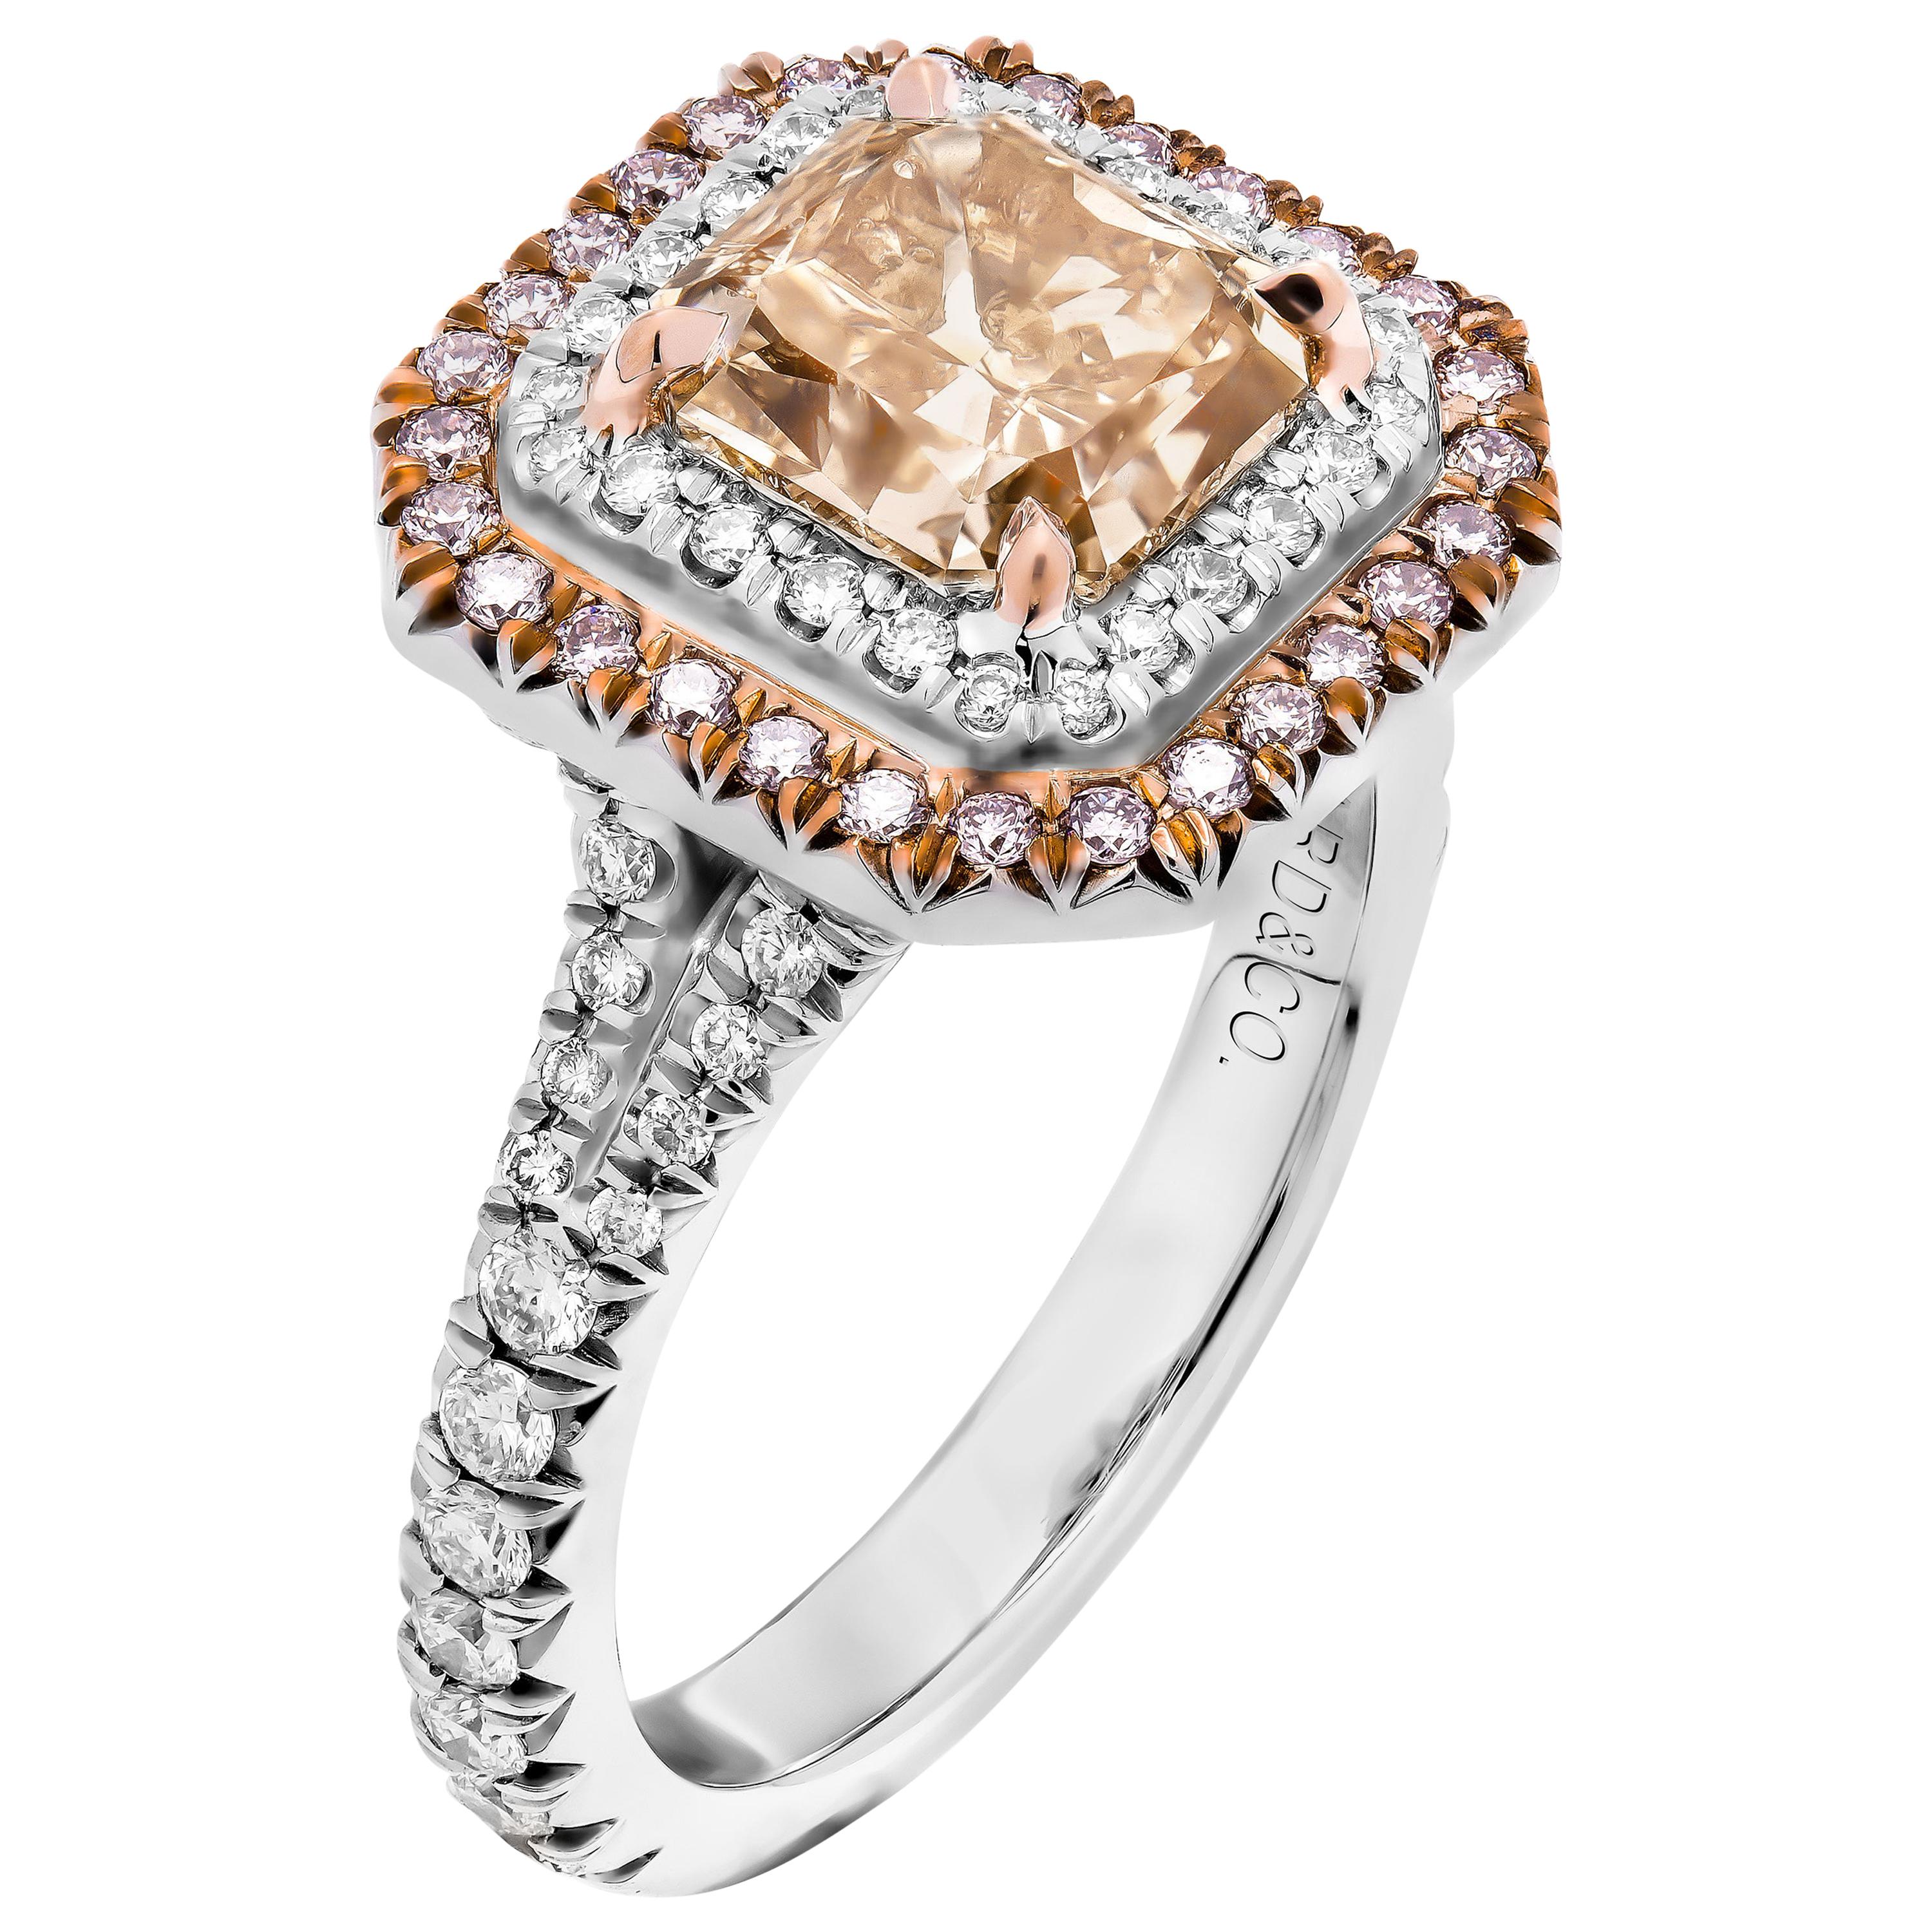 GIA Certified Ring with 2.07 Carat Fancy Brown Orange VS2 Cushion Diamond For Sale